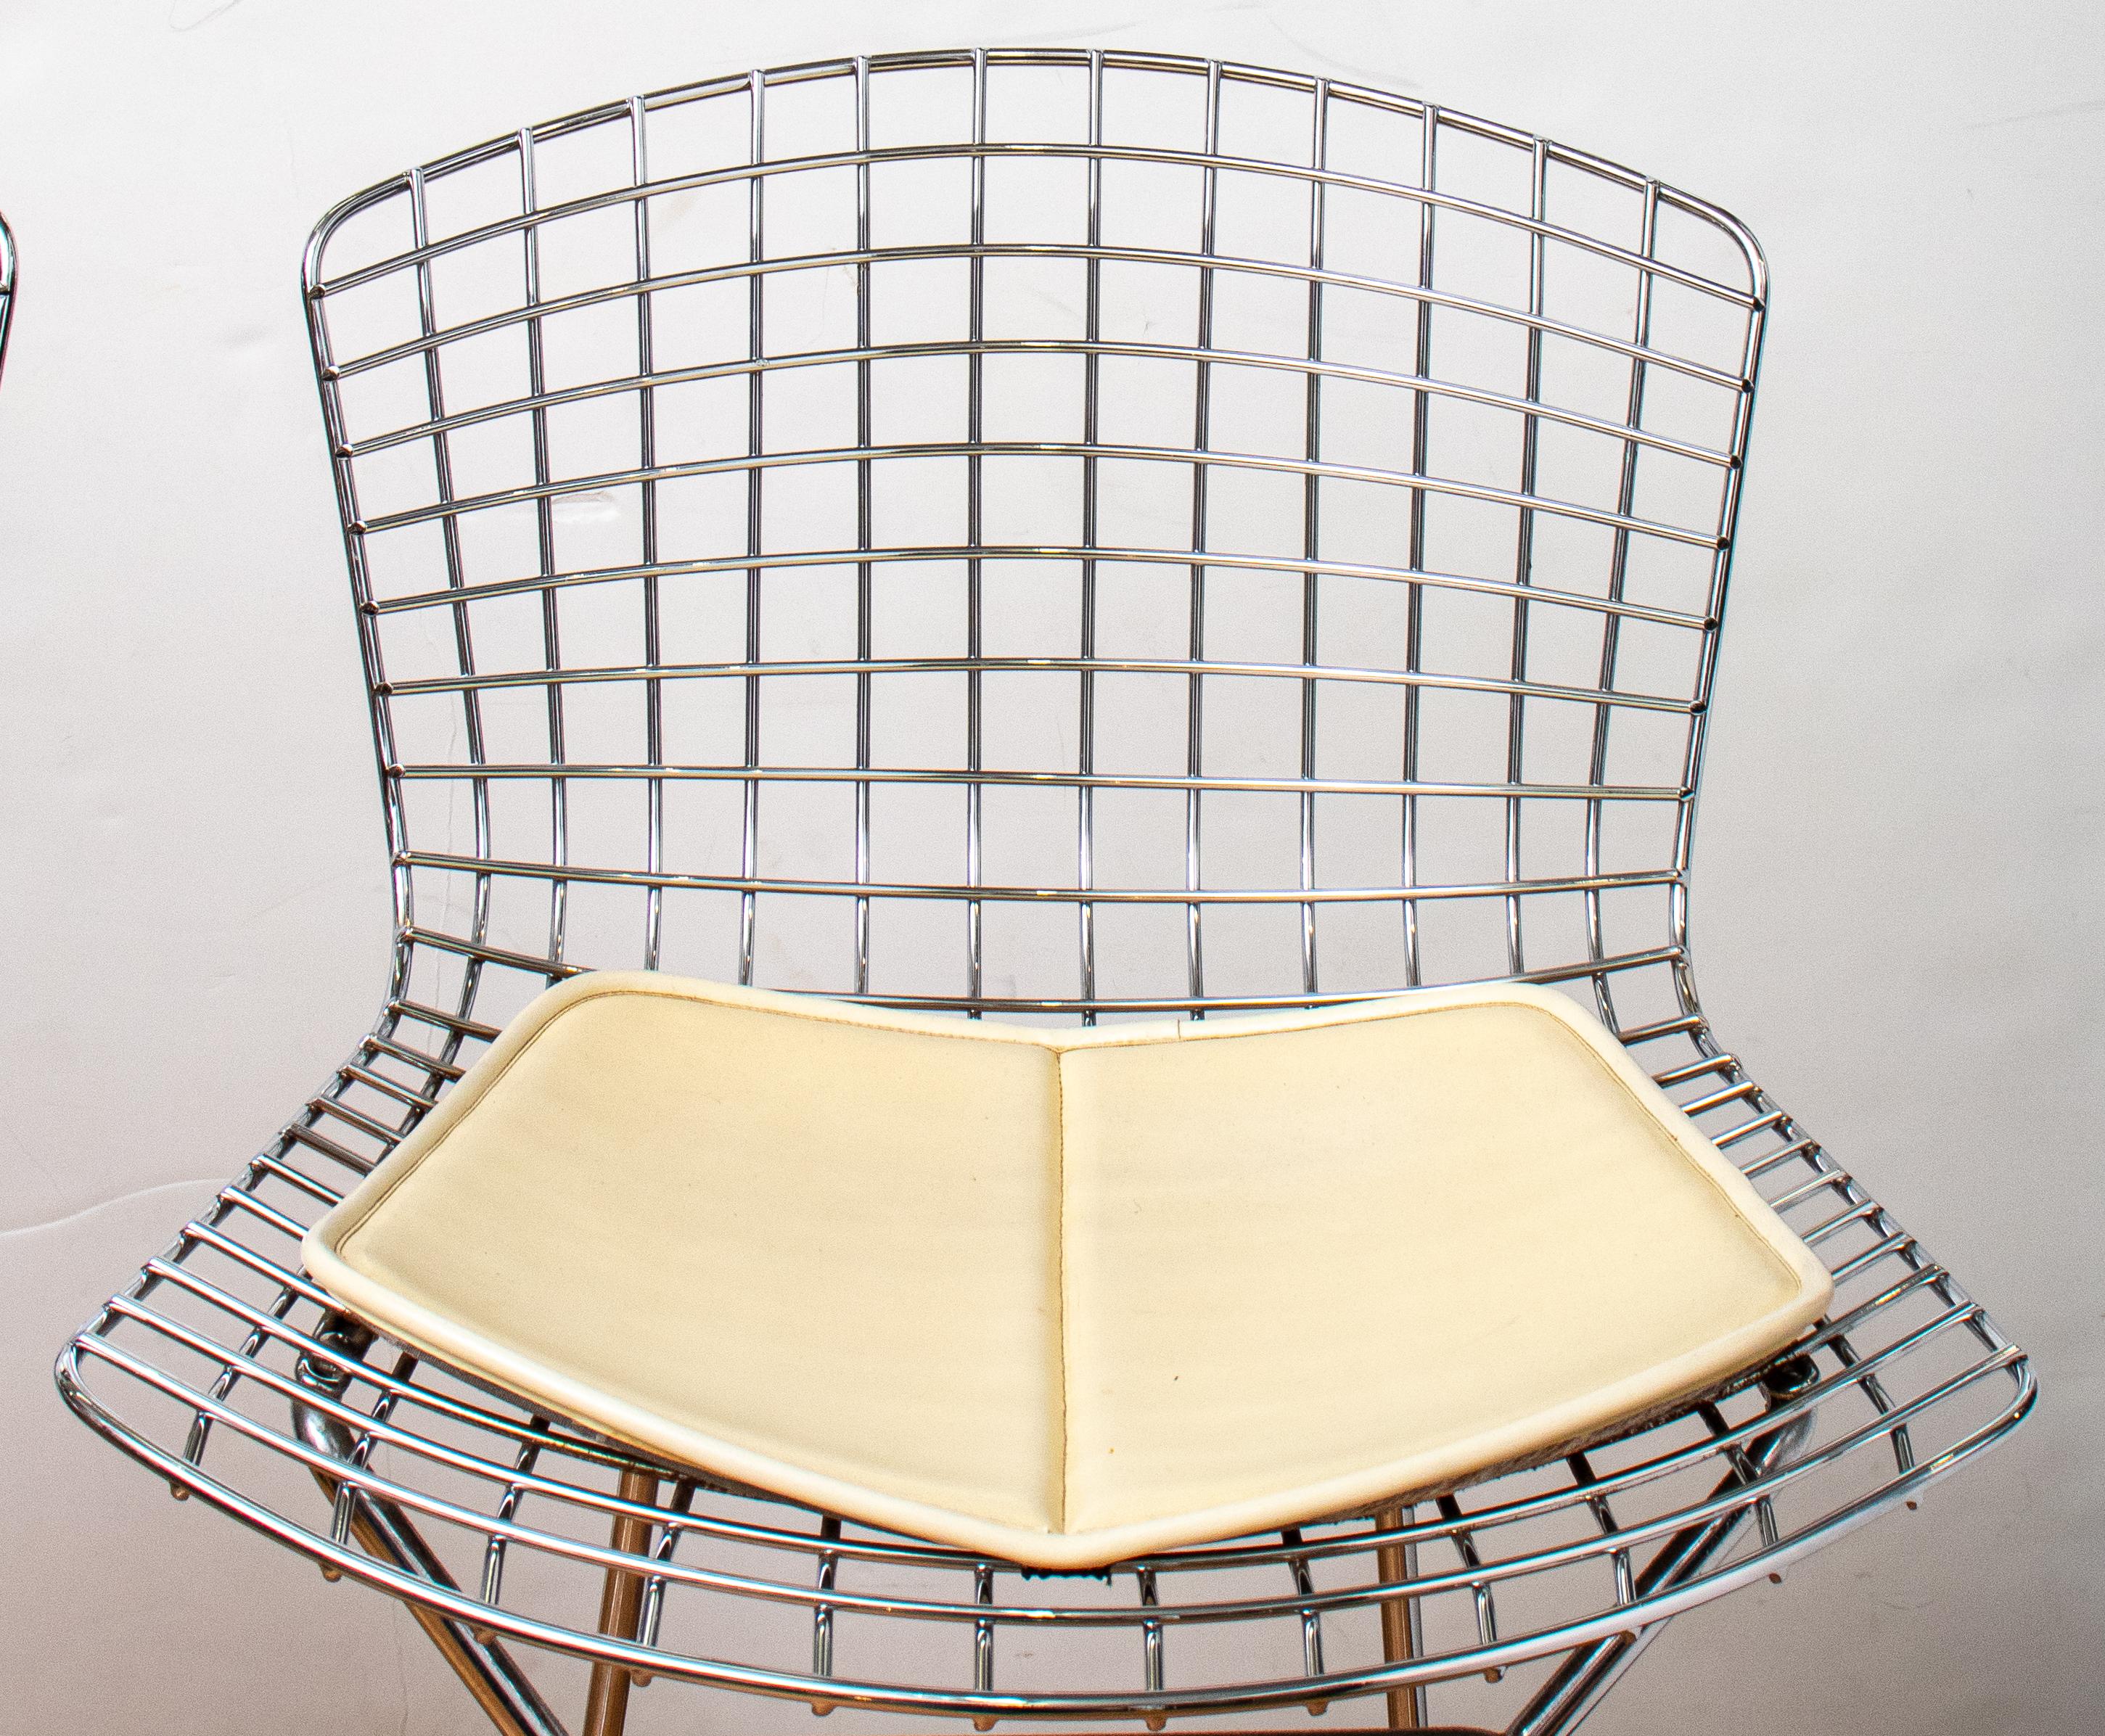 Pair of modern contemporary Harry Bertoia (Italian/American 1915-1978) for Knoll chrome metal bar stool chairs with lattice seats and backs and original Knoll cushions, both marked. 38.5